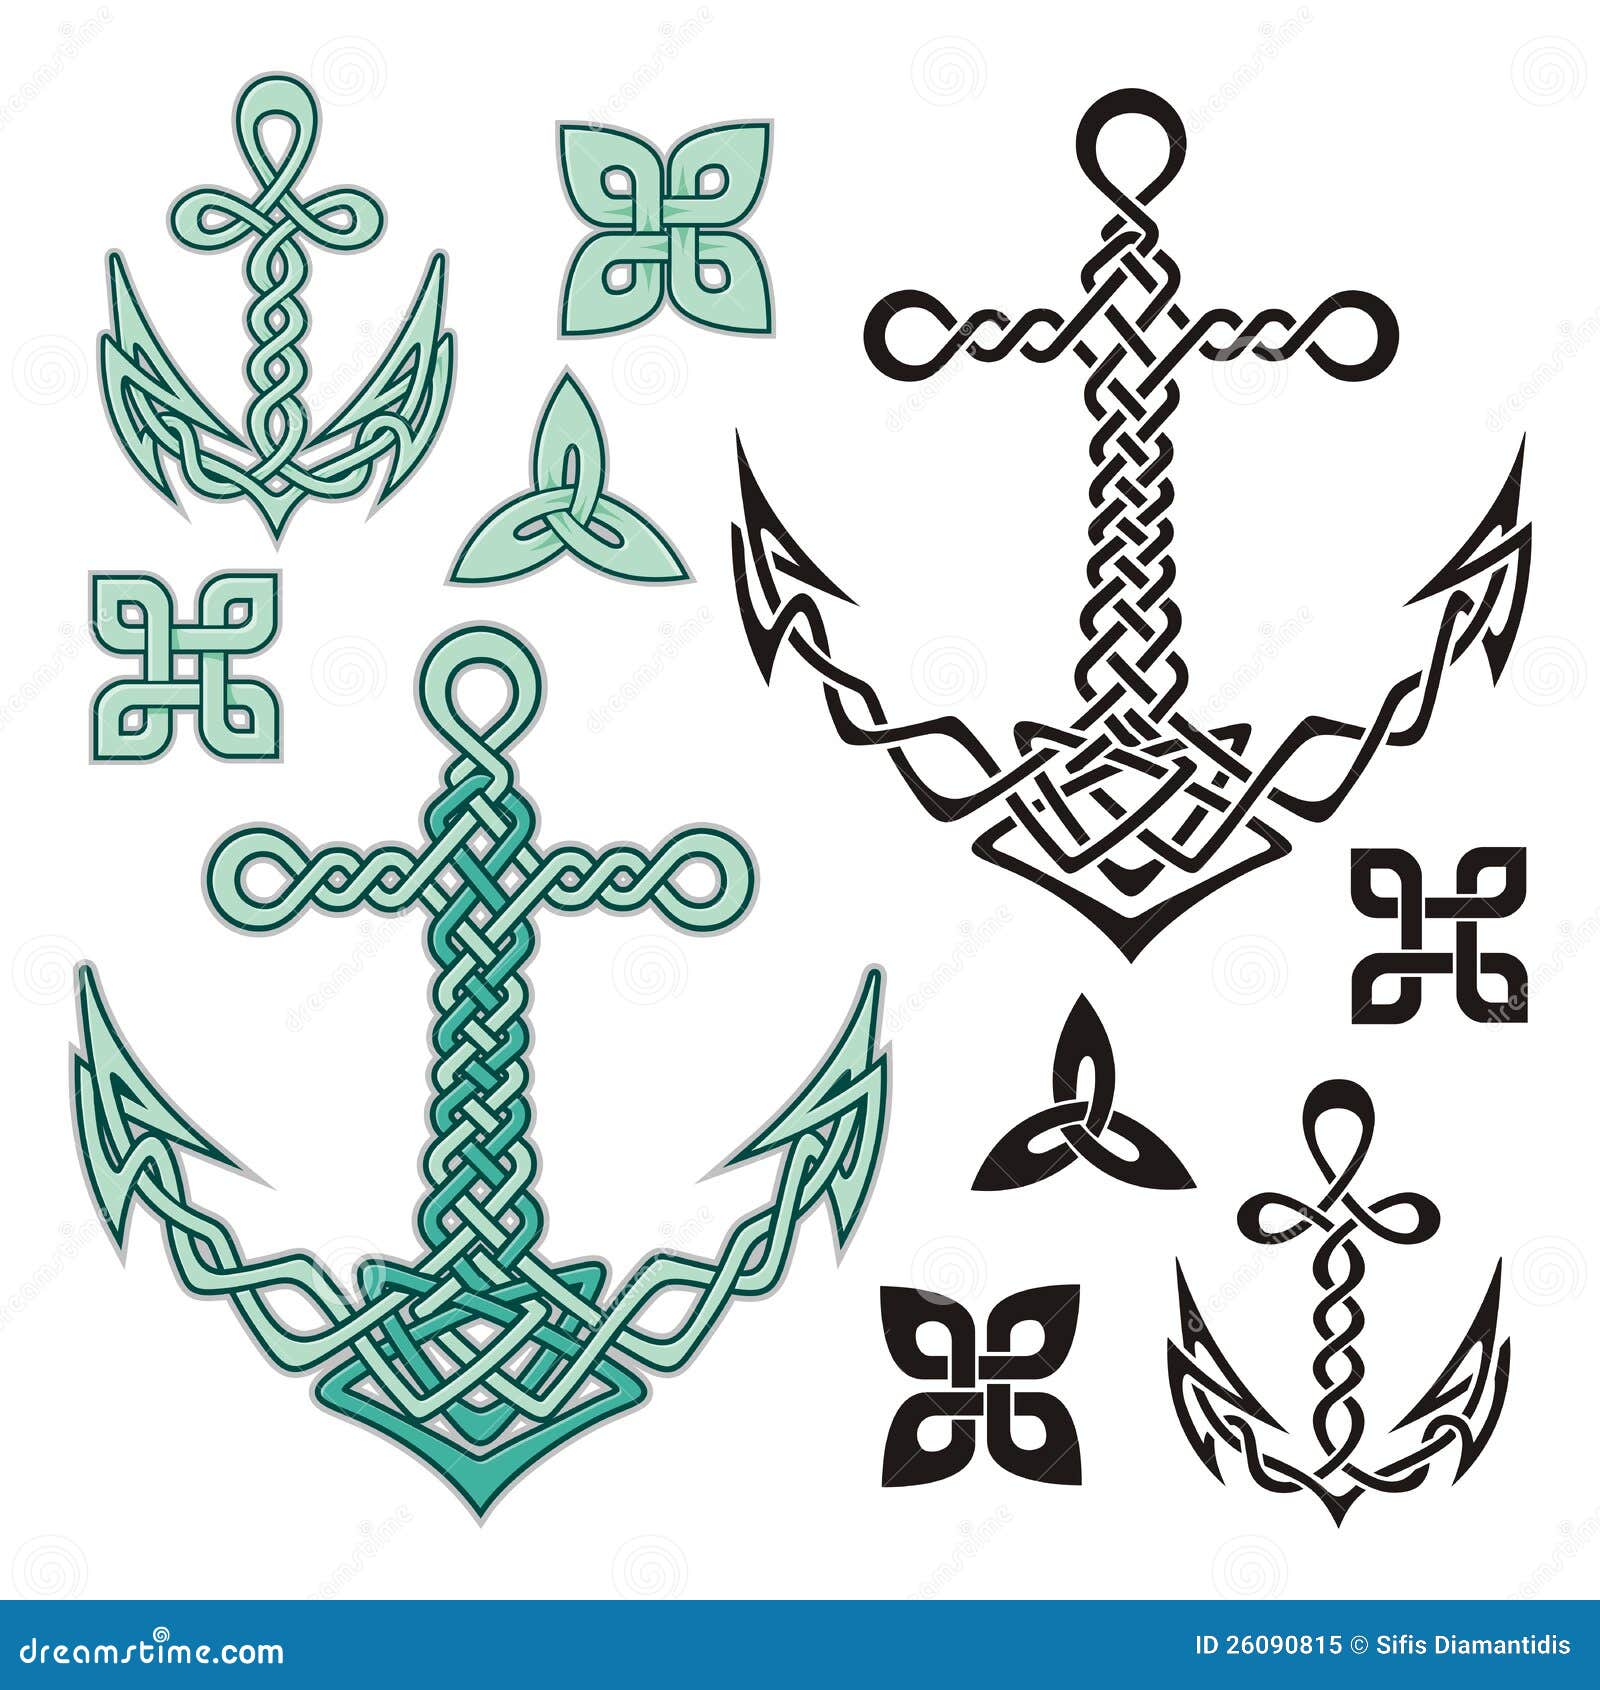 Sgt Grit Marine Specialties - Celtic Eagle, Globe, and Anchor  http://www.grunt.com/corps/tattoos/details/8531/ It took me the longest  time to find an artist up to the task of creating a 100% knotwork EGA. Makes